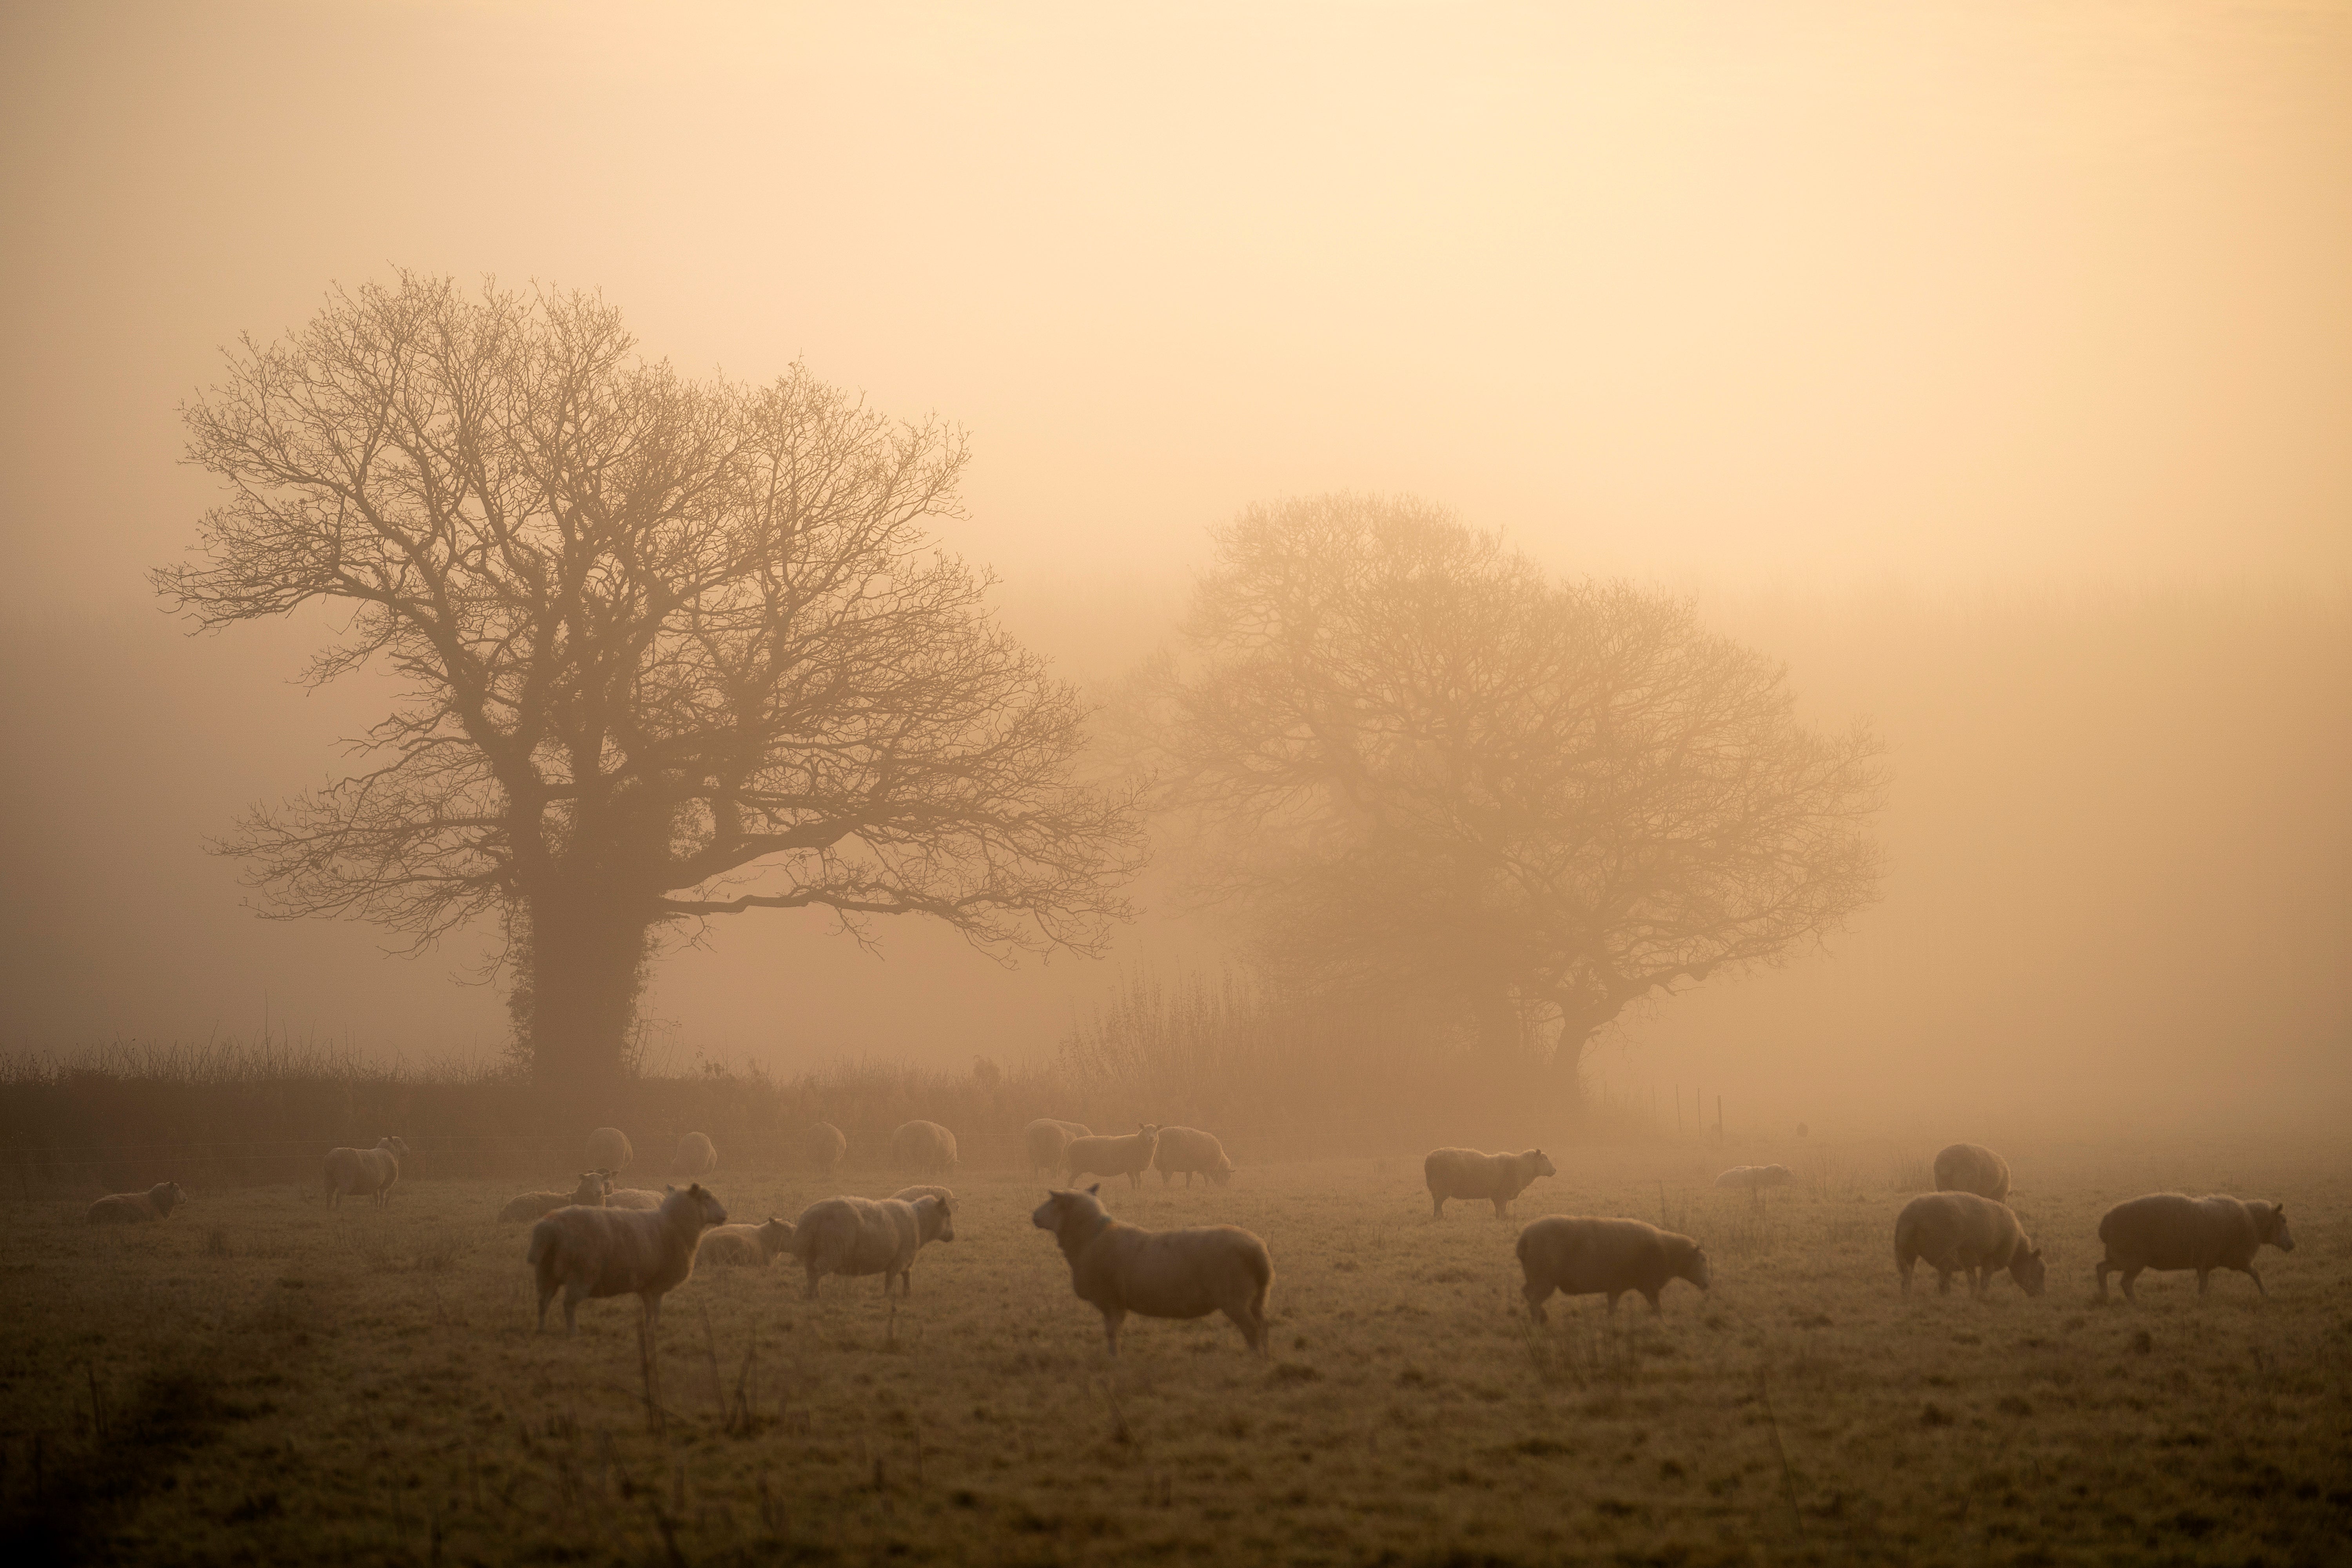 Freezing fog can form in the UK when temperatures are low